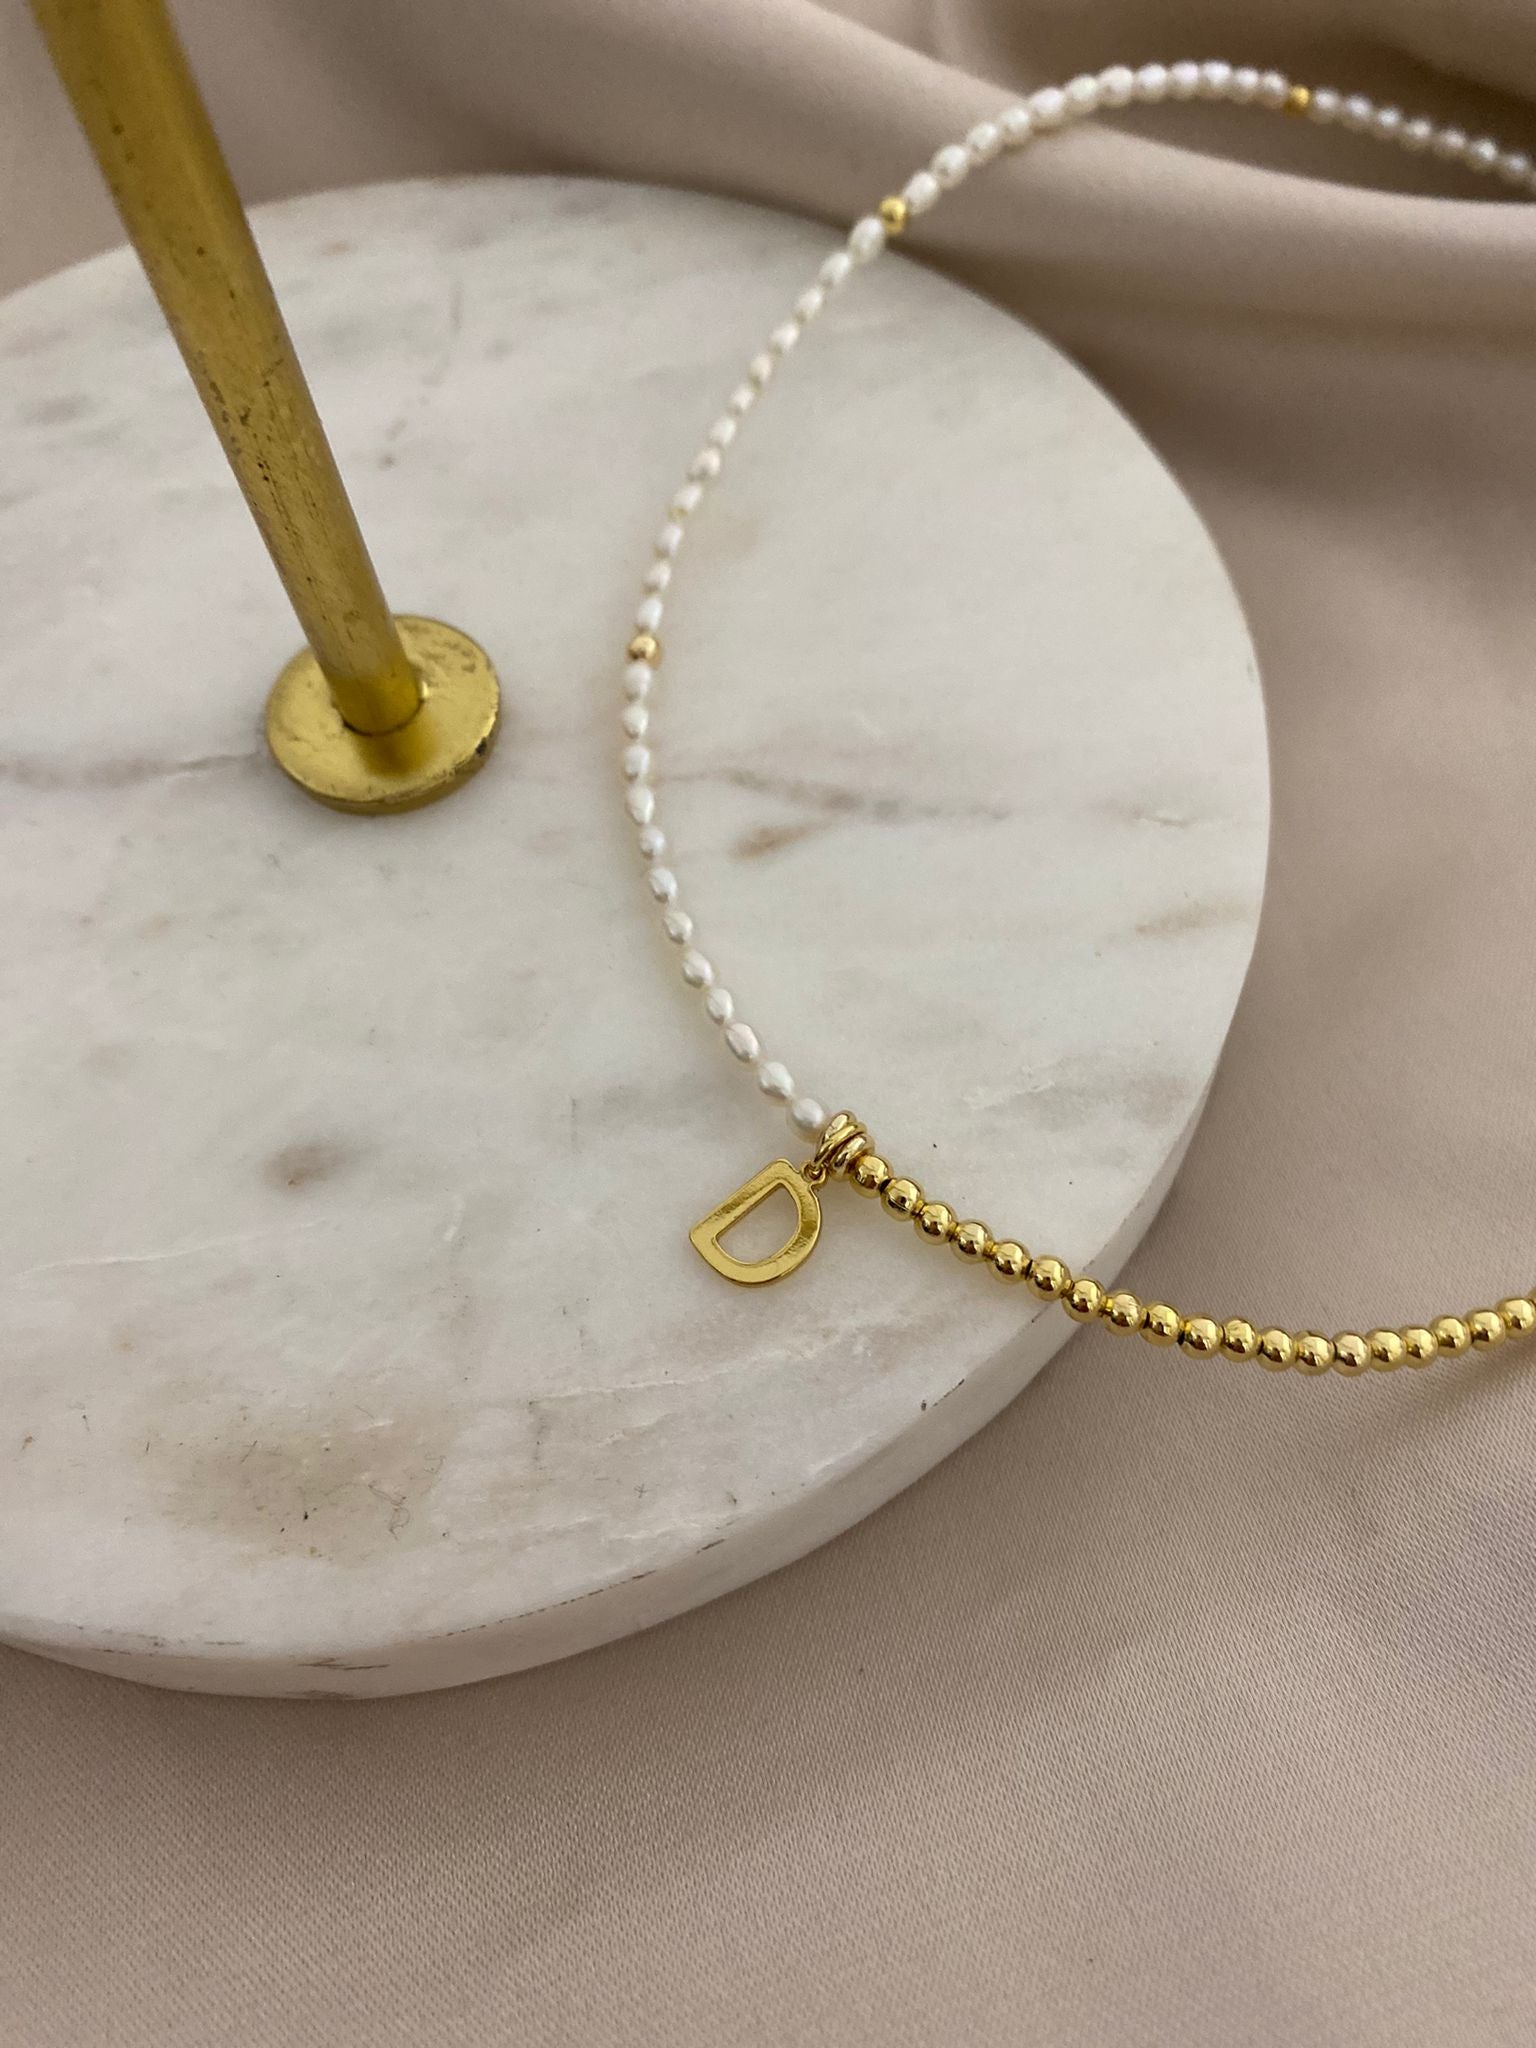 Half Pearl and Gold Necklace with Initial